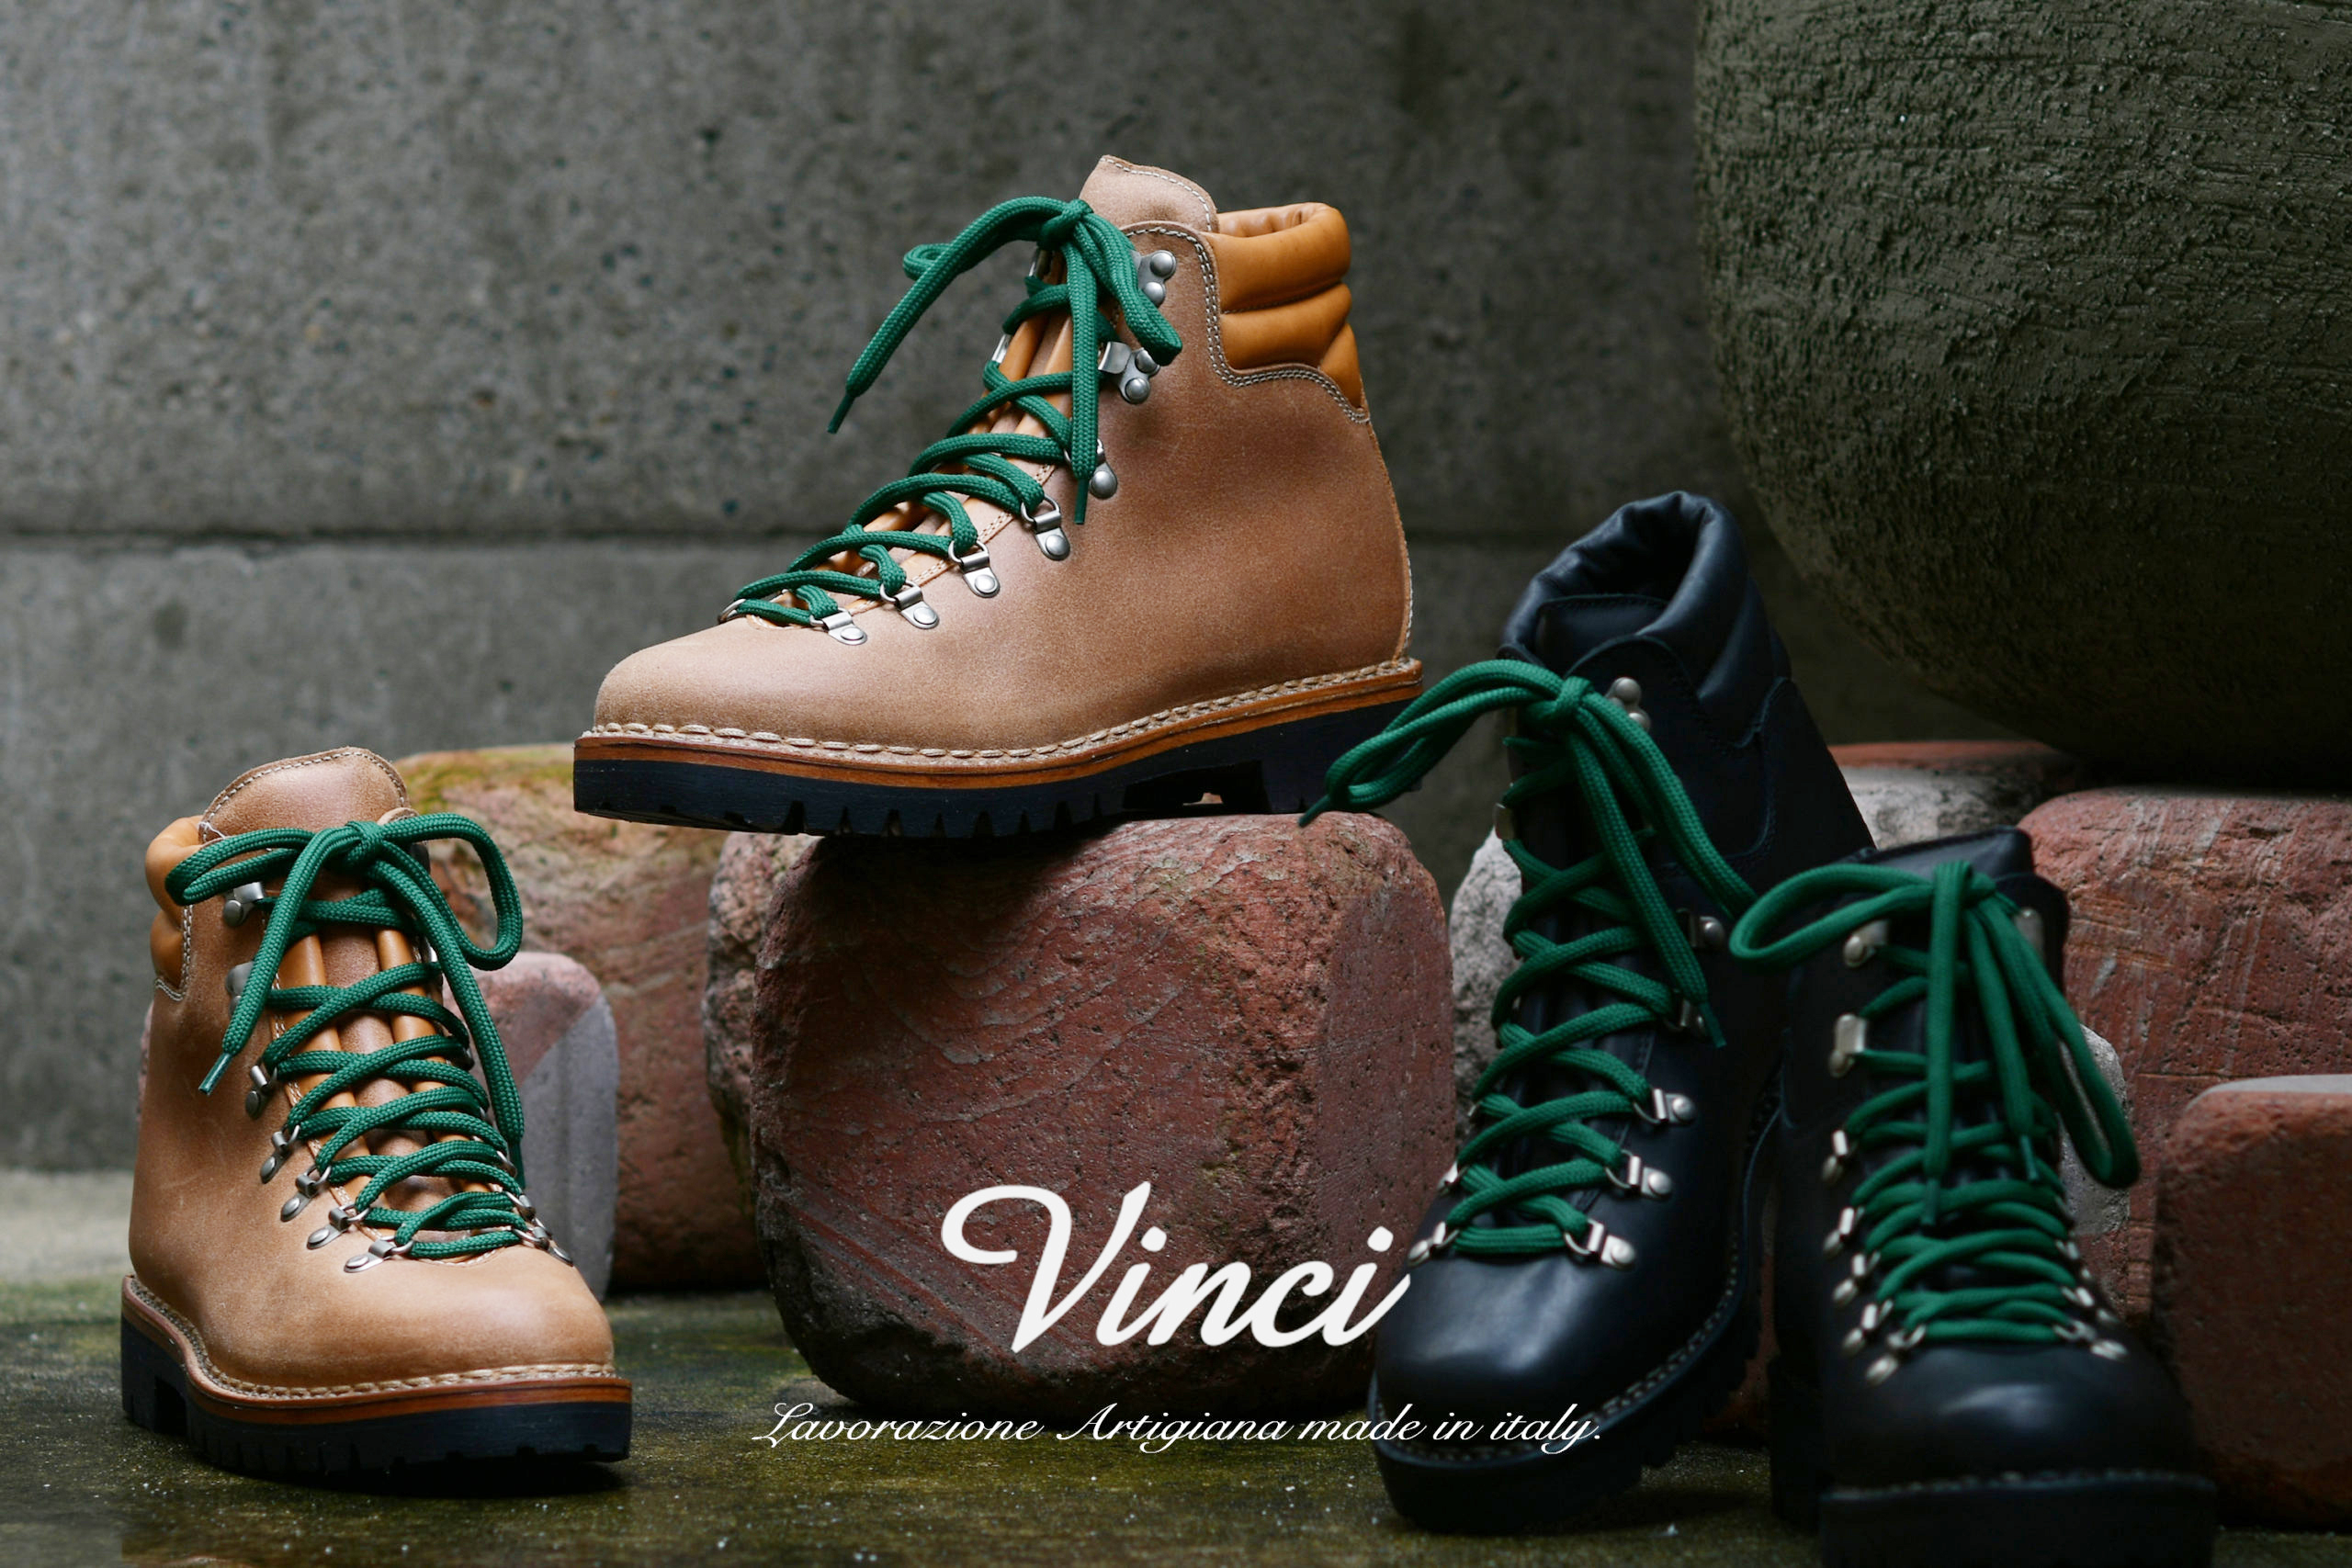 Vinci Hand Made Boots in Toscana Italy. - Silver and Gold